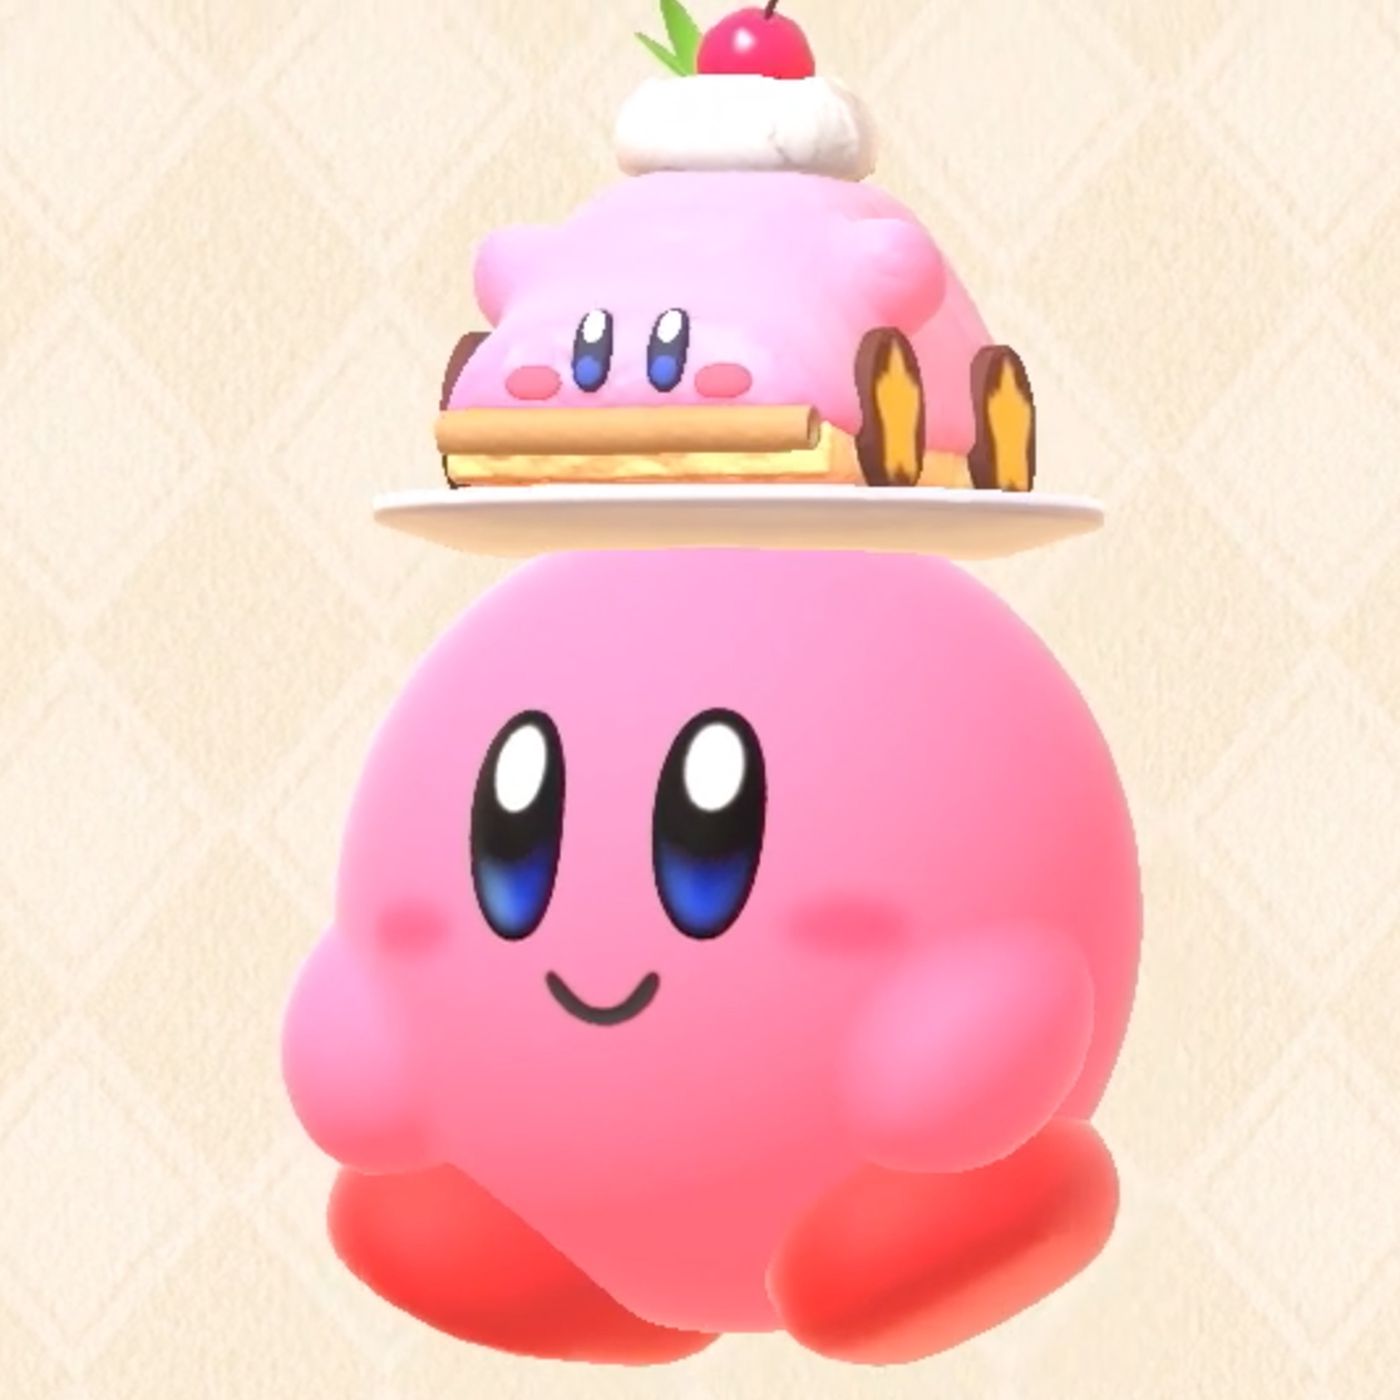 Kirby's Dream Buffet gameplay overview shows modes, Kirby Car Cake Hat